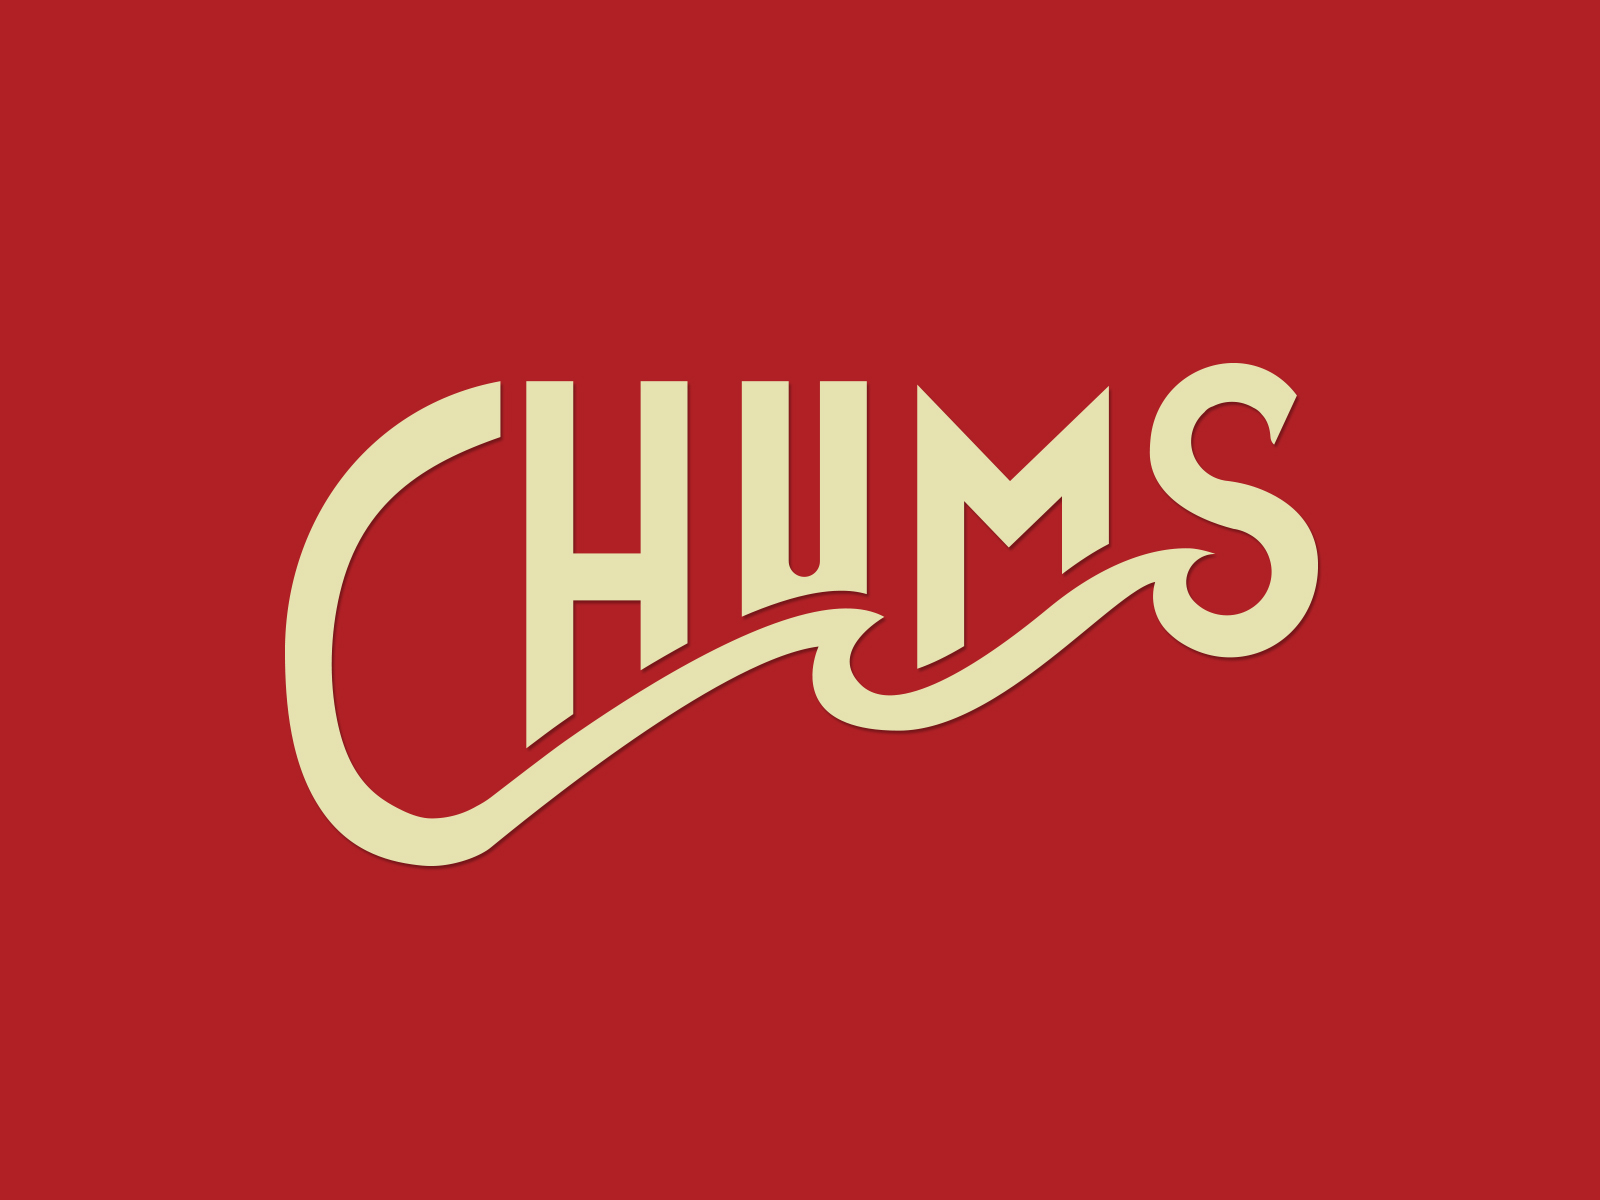 Chums Type Badge By Cody Driver On Dribbble